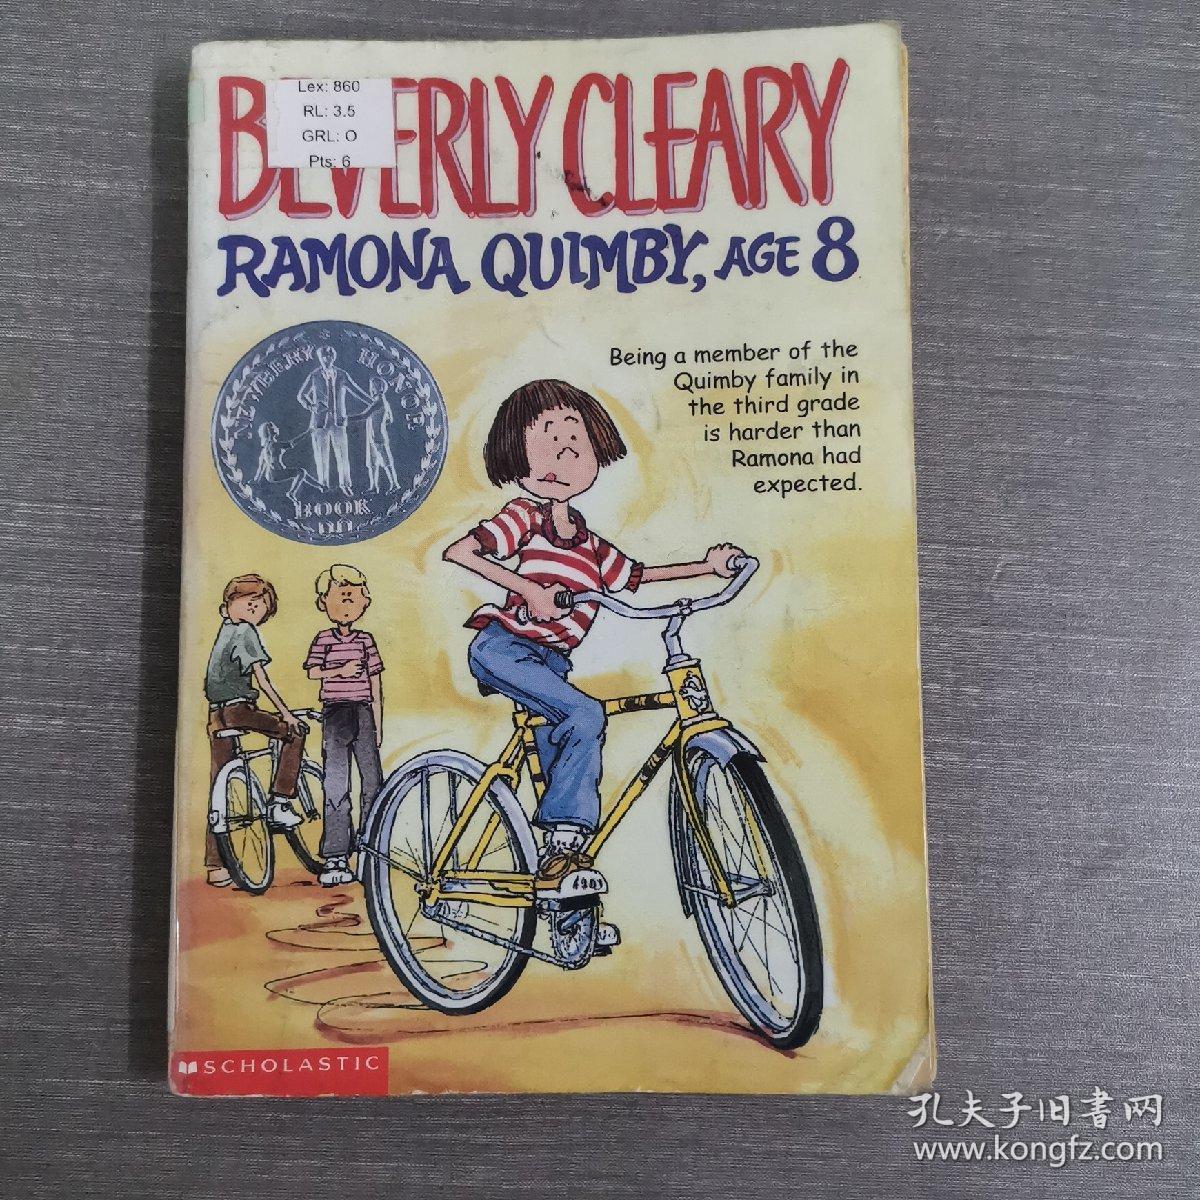 BEVERLY CLEARY RAMONA QUIMBY AGE 8